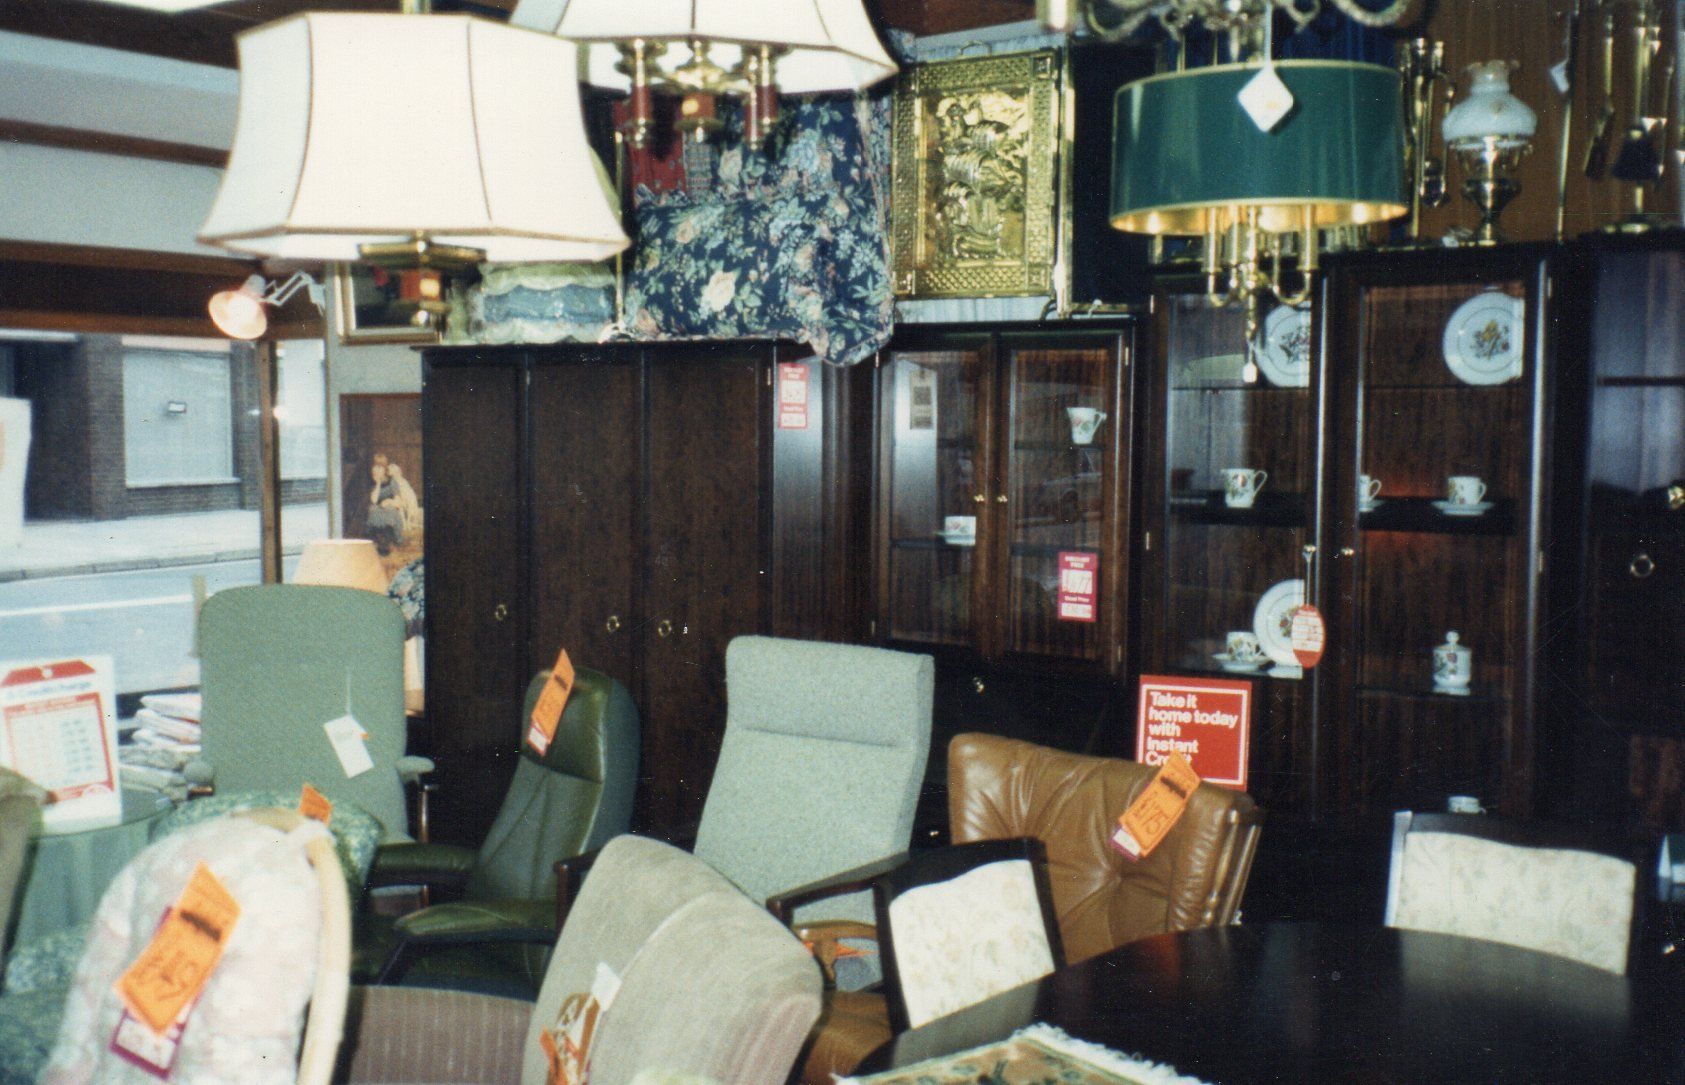 Furniture on display during the early 1980s